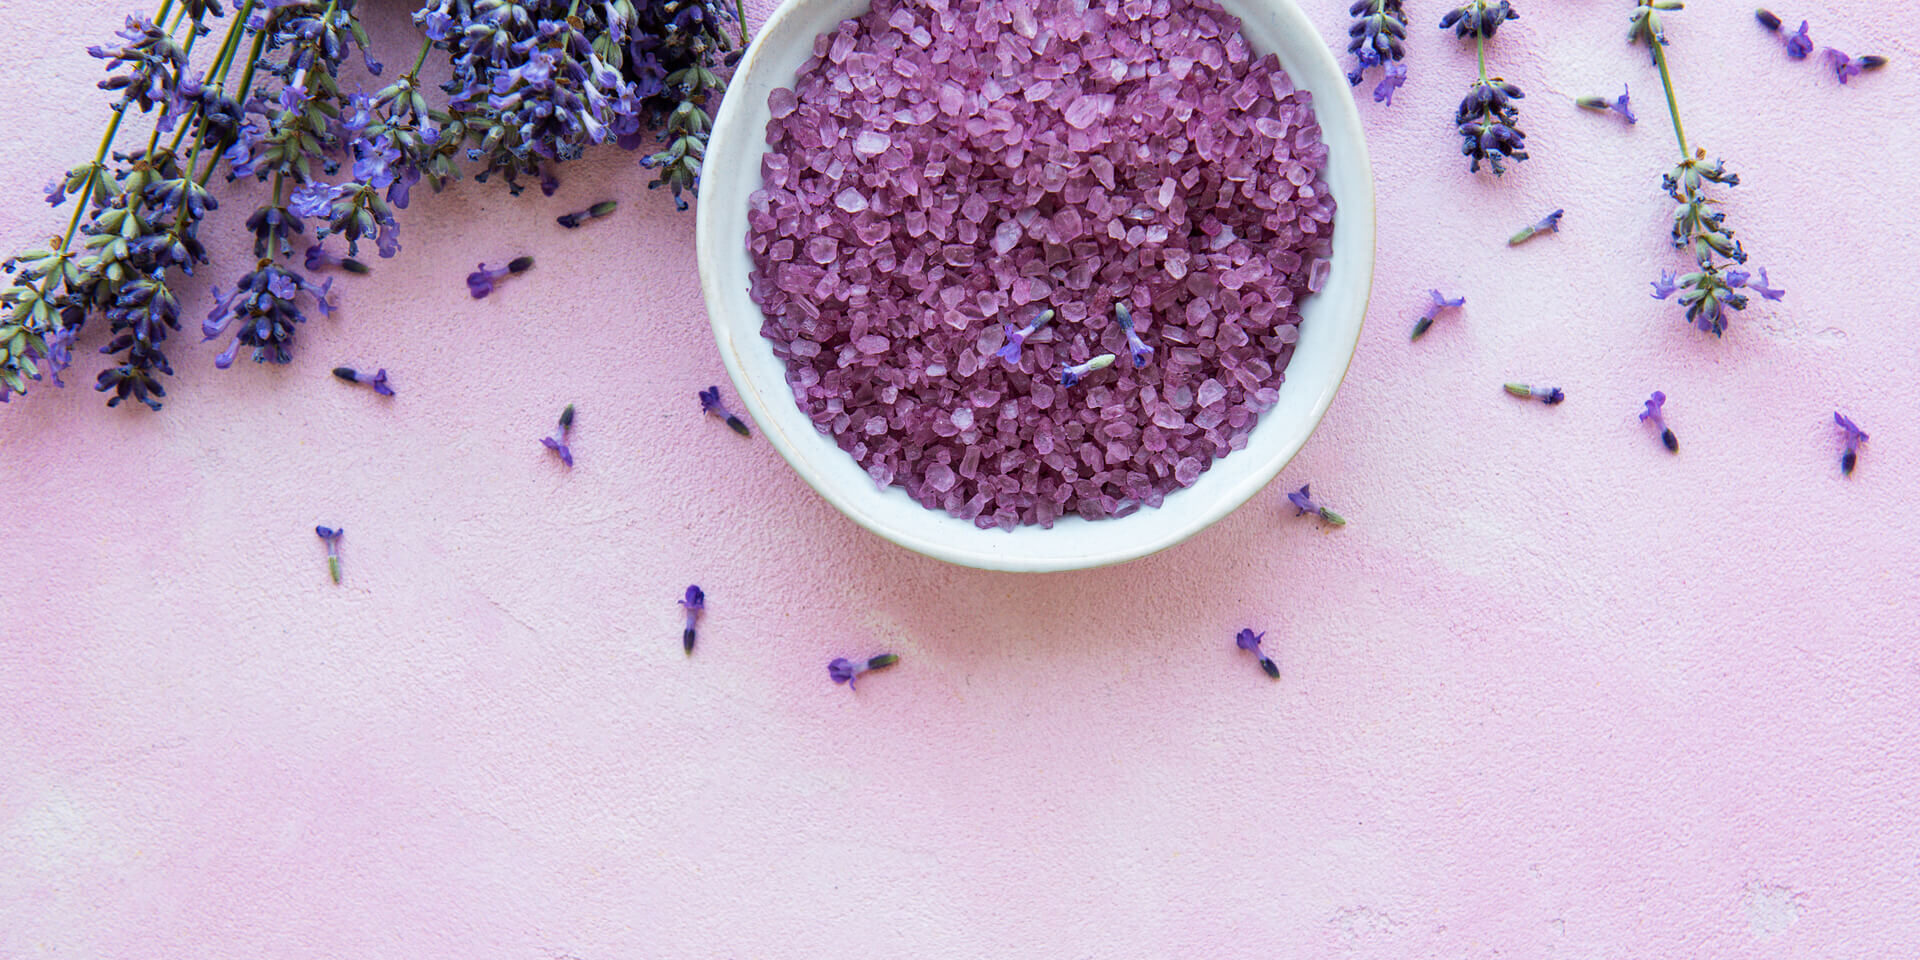 lavender-flowers-and-natural-cosmetic-2022-02-09-19-18-57-utc(1)